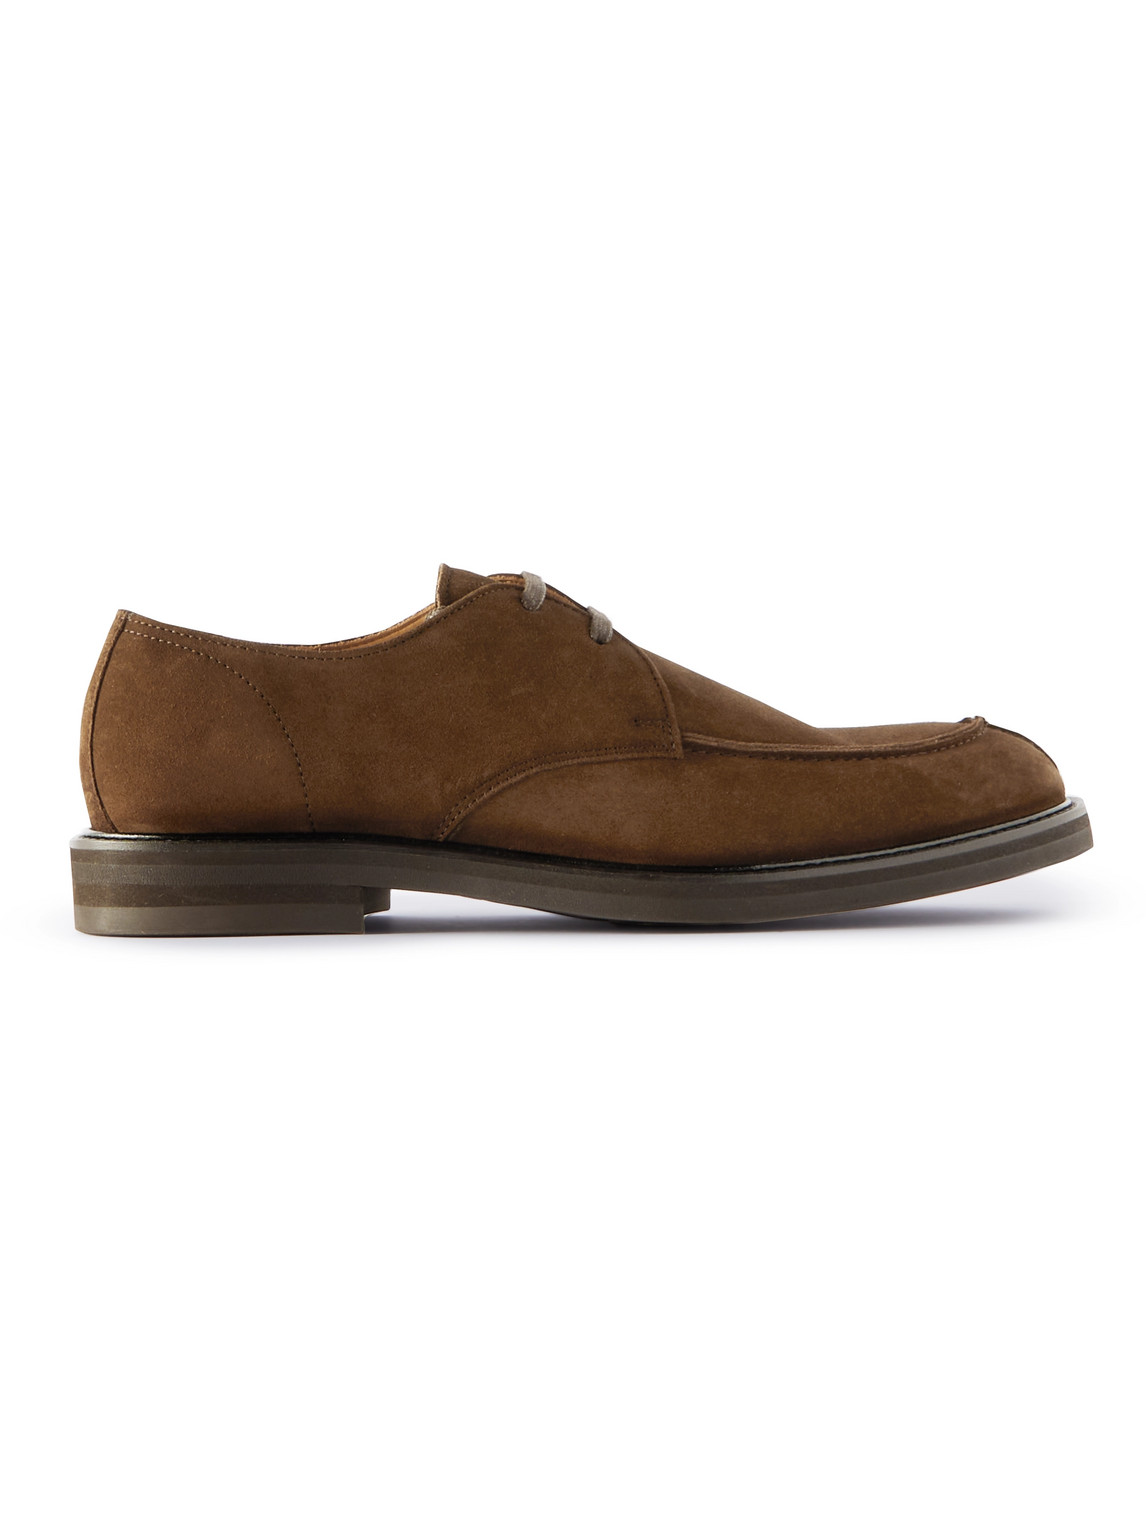 Andrew Split-Toe Regenerated Suede by evolo® Derby Shoes